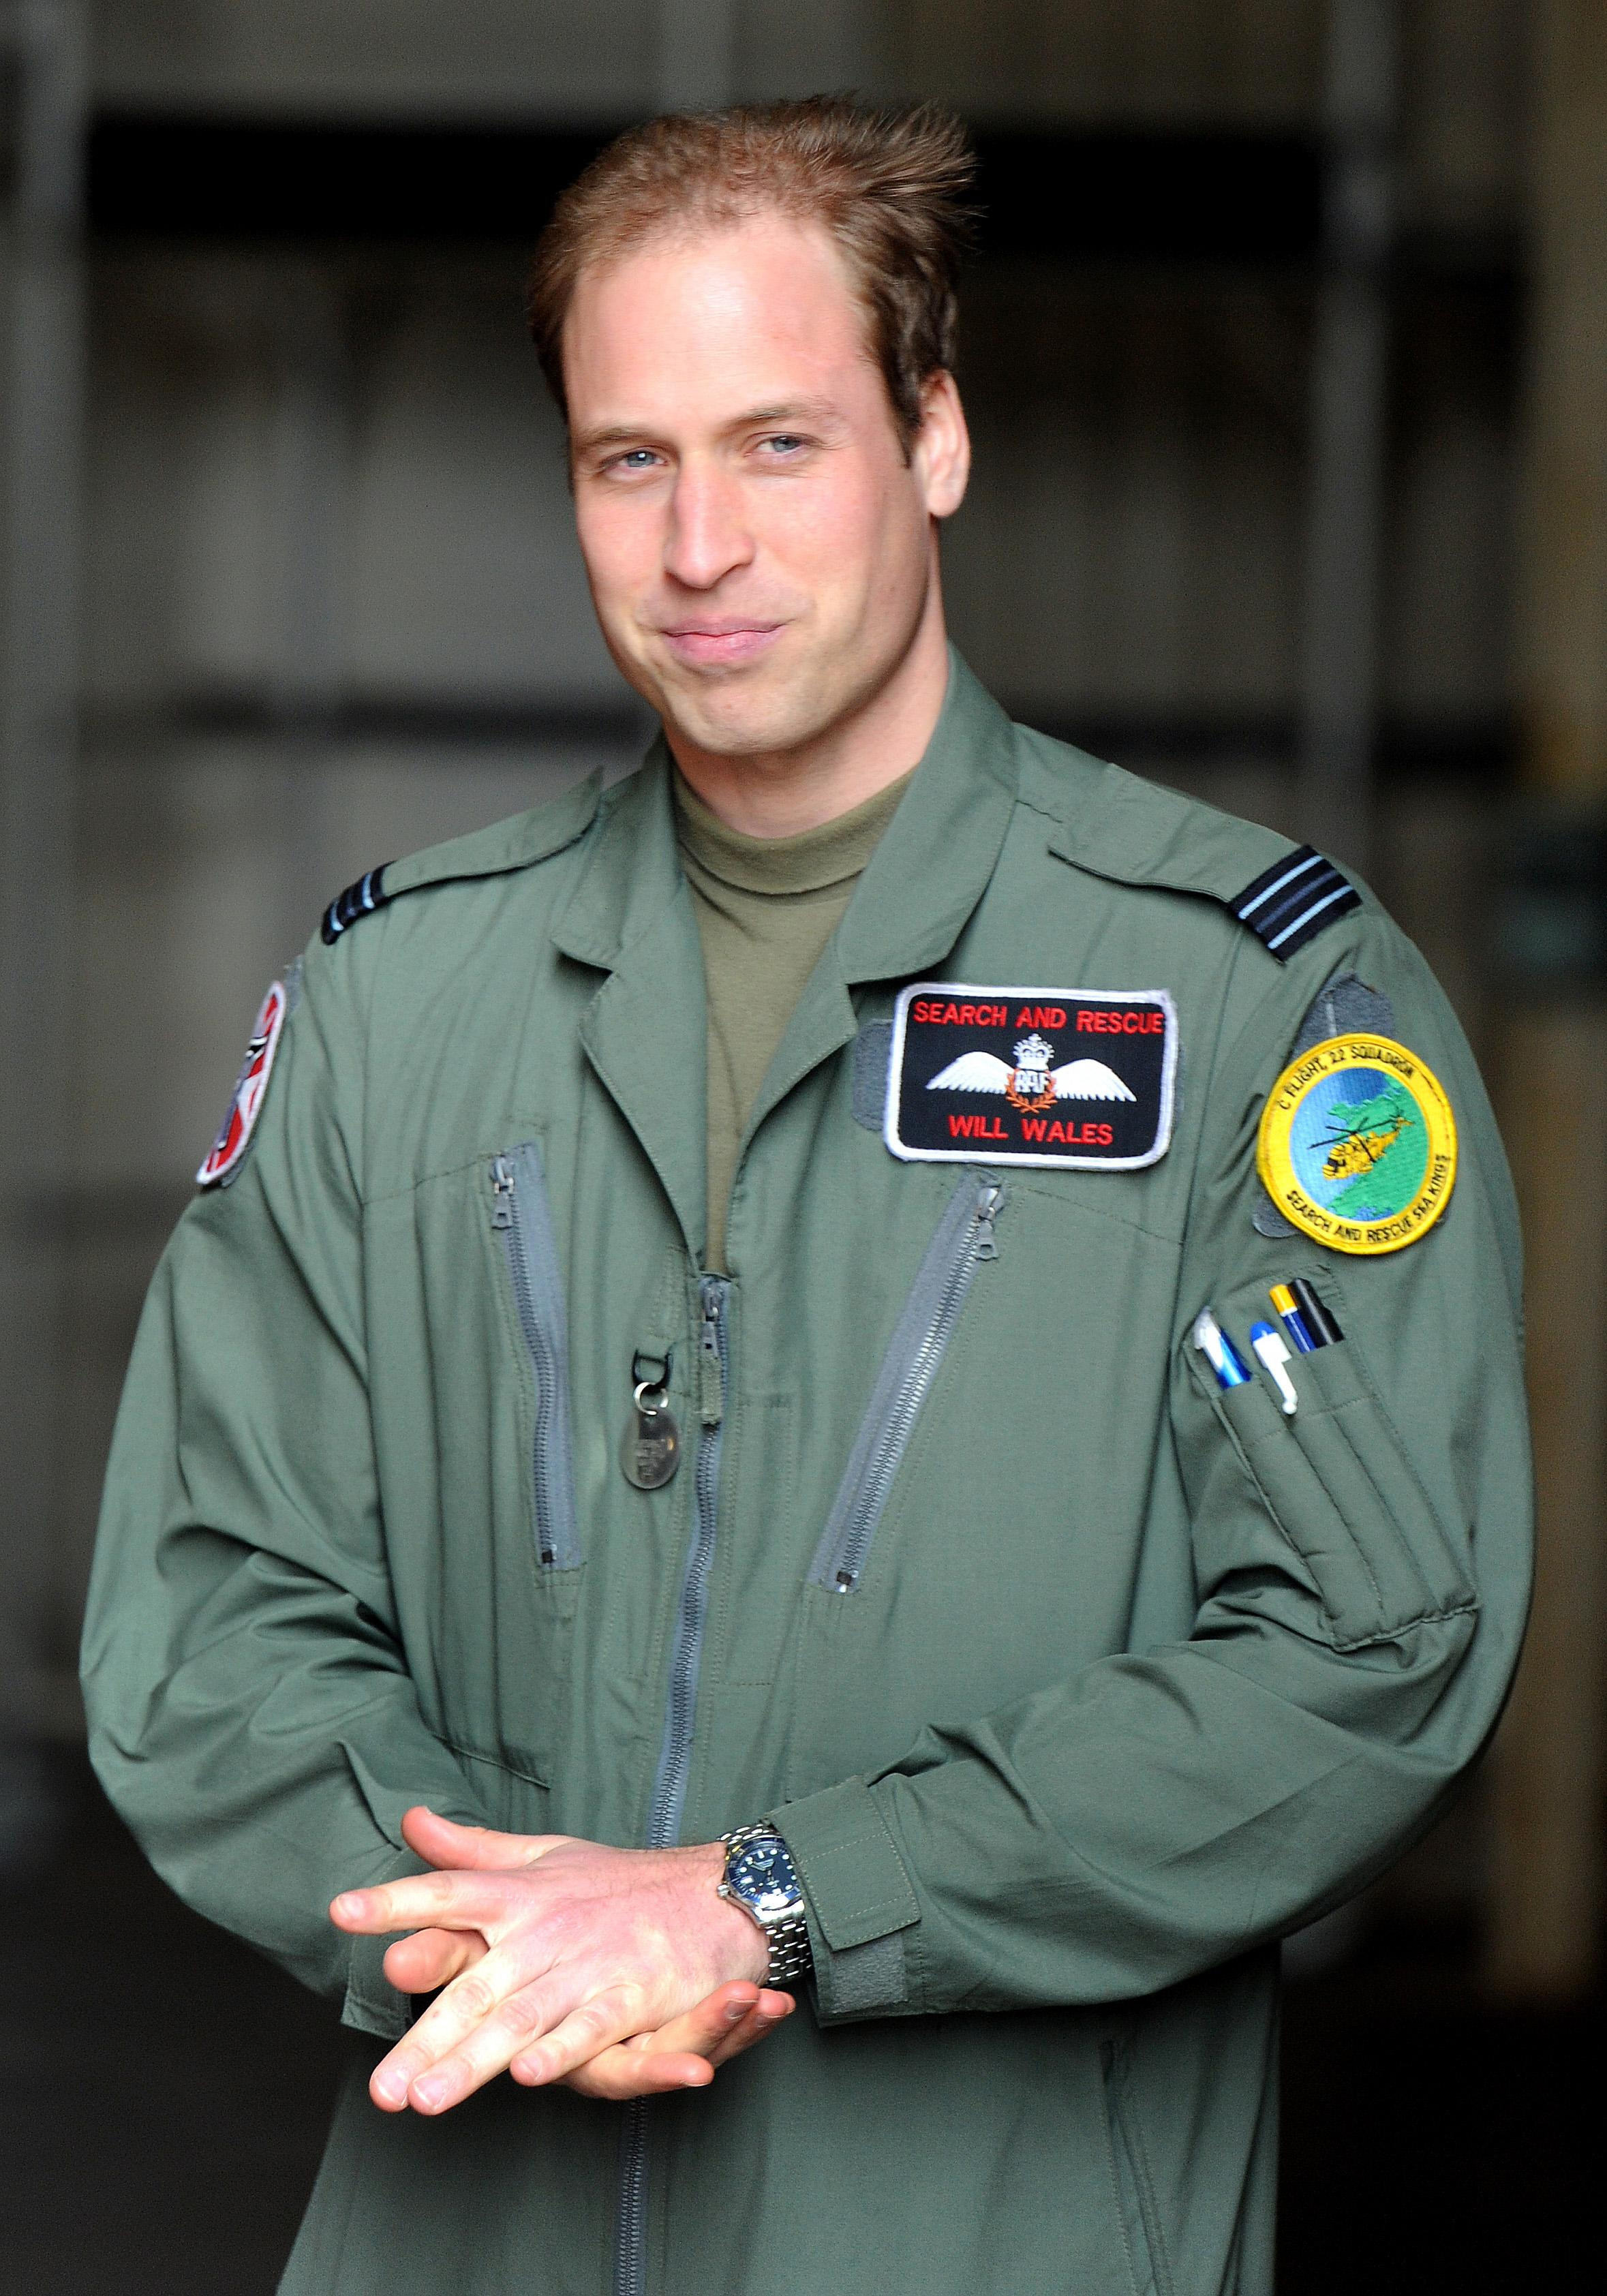 William standing in a helicopter hanger after saying goodbye to Britain's Queen Elizabeth II and the Duke of Edinburgh during a visit to RAF Valley in Anglesey in April 2011 (John Stillwell/PA)